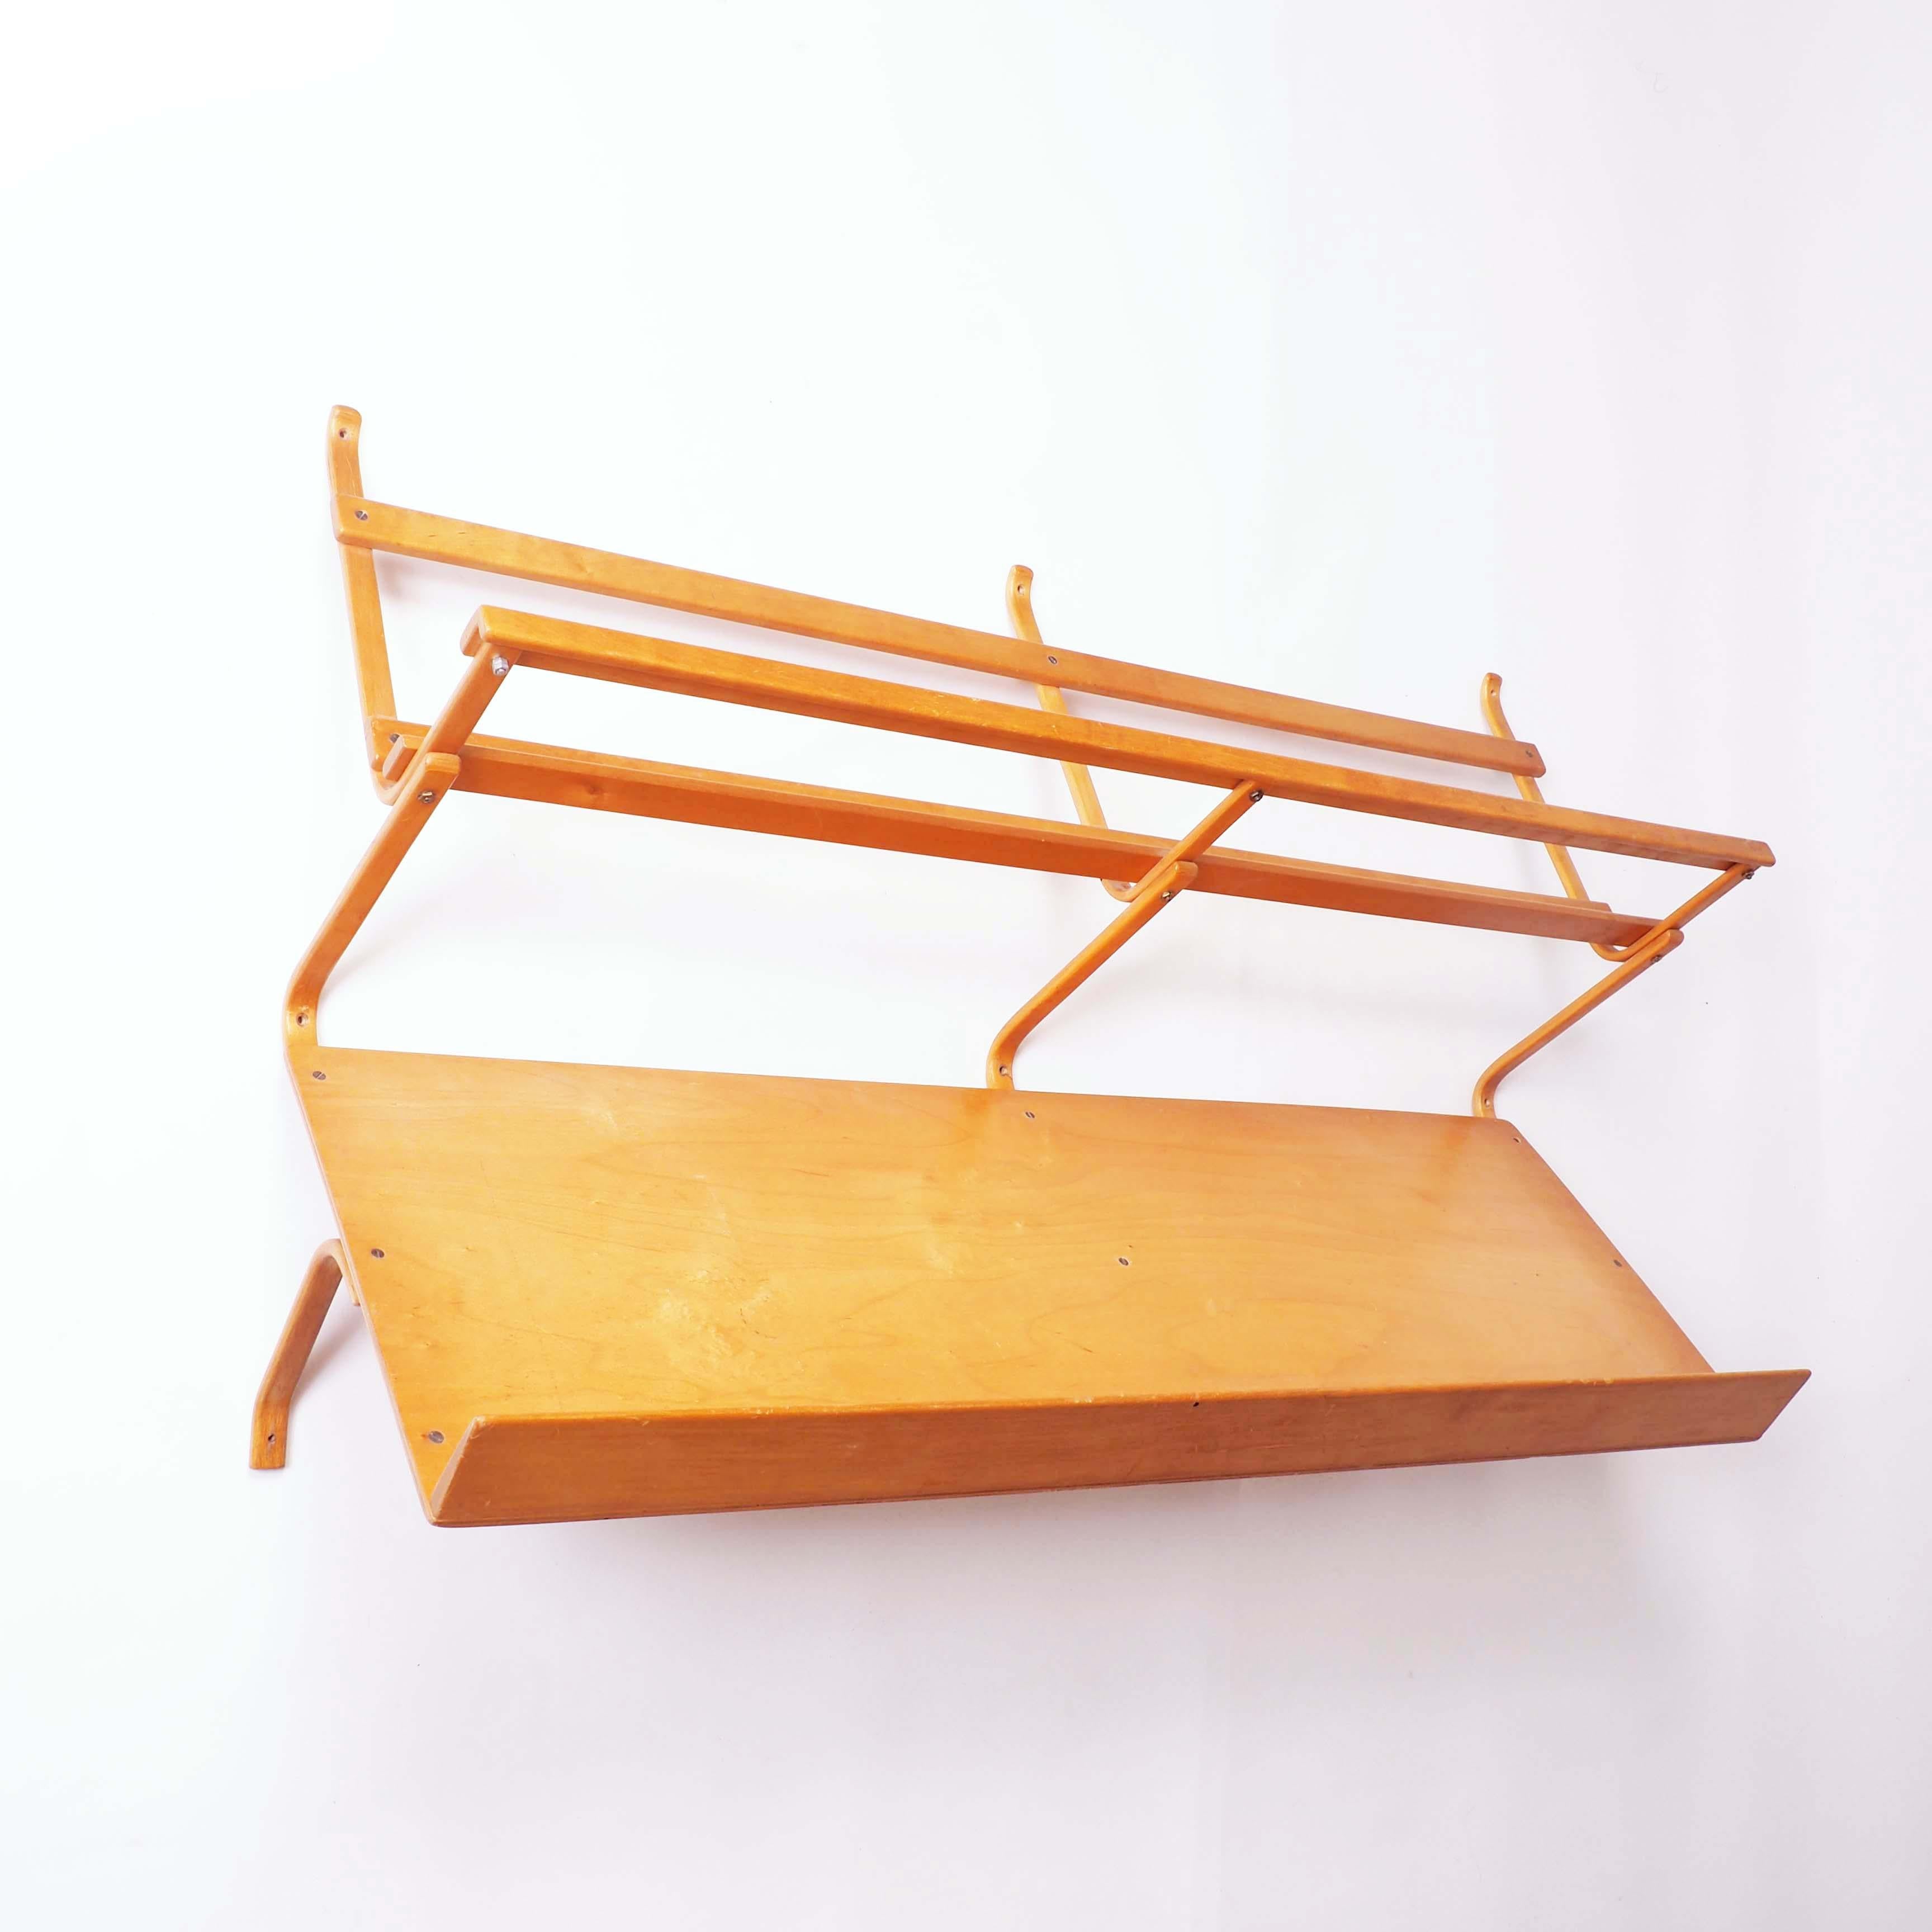 Together with Alvar Aalto, Bruno Mathsson was the first Scandinavian designer to use bentwood technique. During the early period of his production the only way to buy his furniture was to call or write a personal letter directly to his company. This